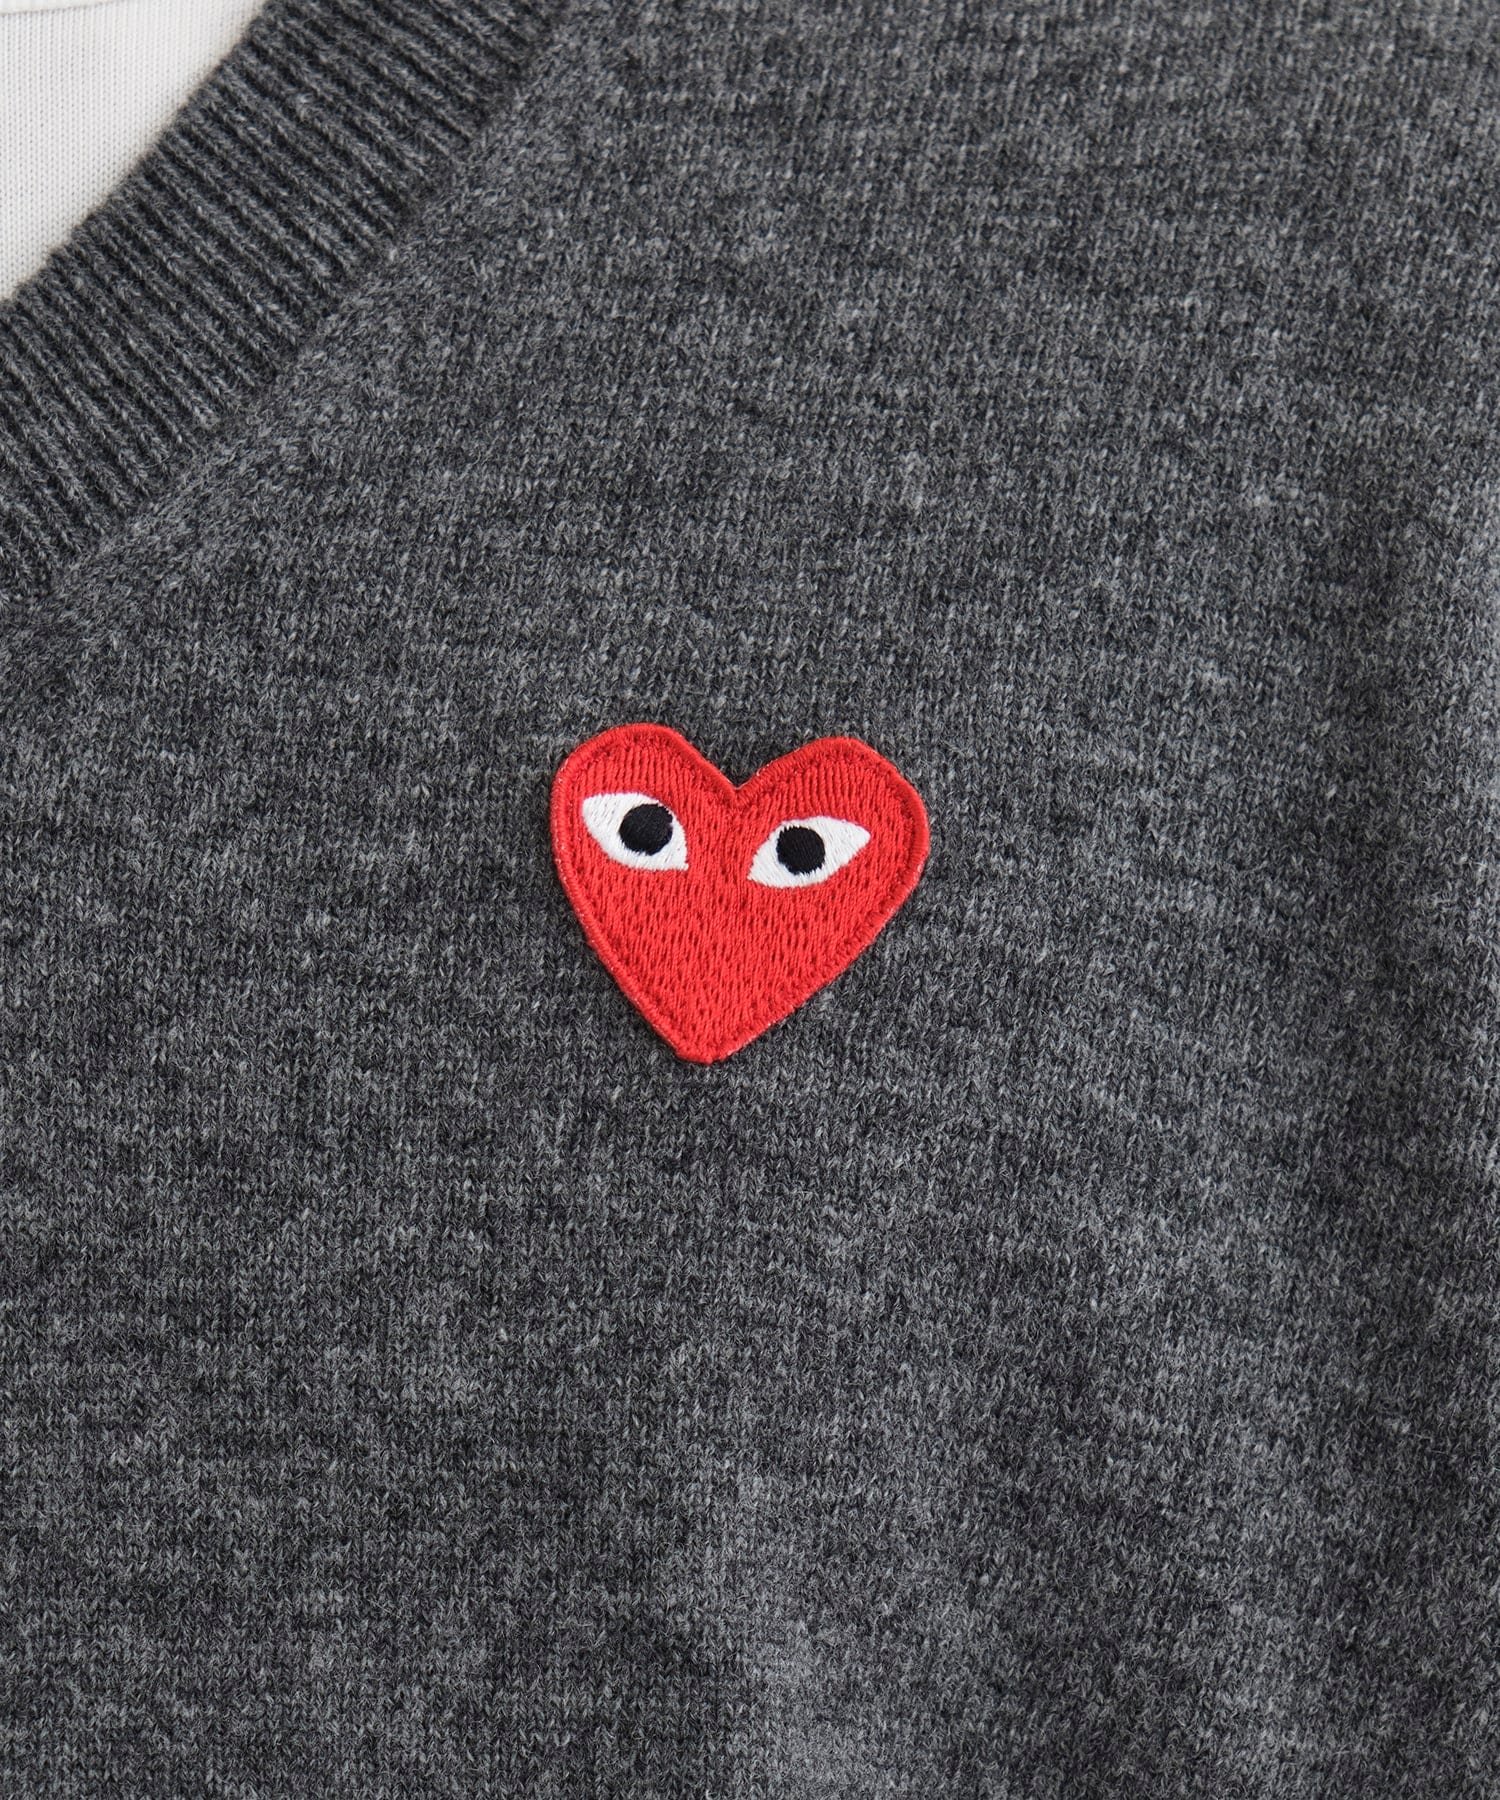 AZ-N002-051 PLAY V-NECK PULLOVER RED HEART PLAY COMME des GARCONS